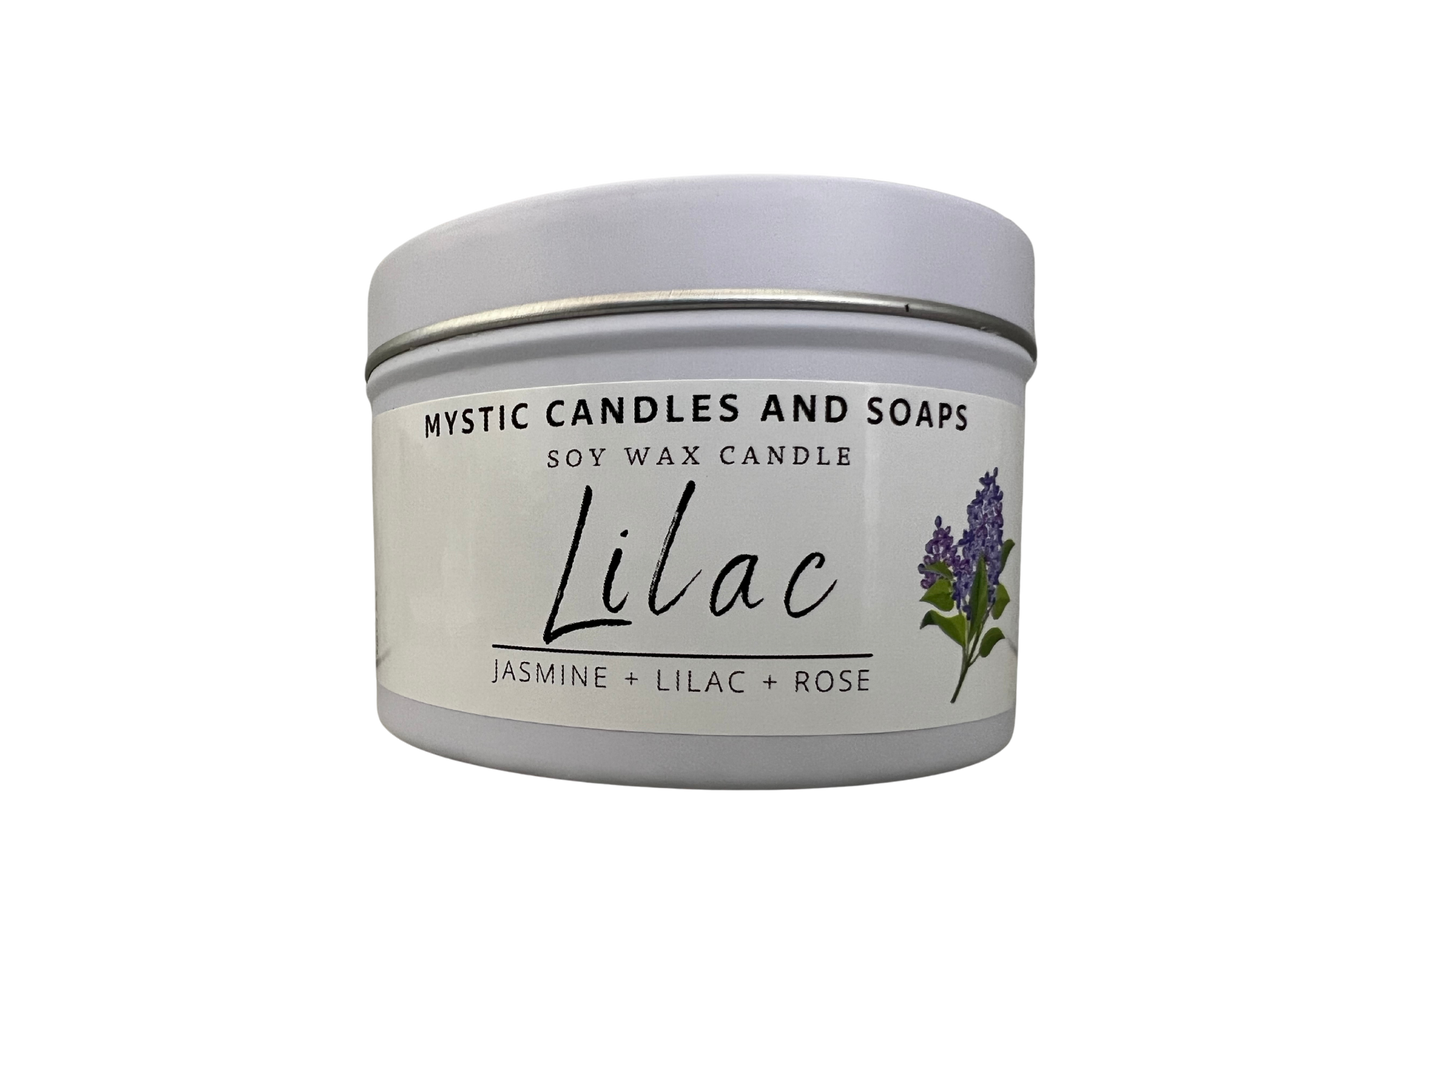 Lilac Flameless Candle - Mystic Candles and Soaps LLC